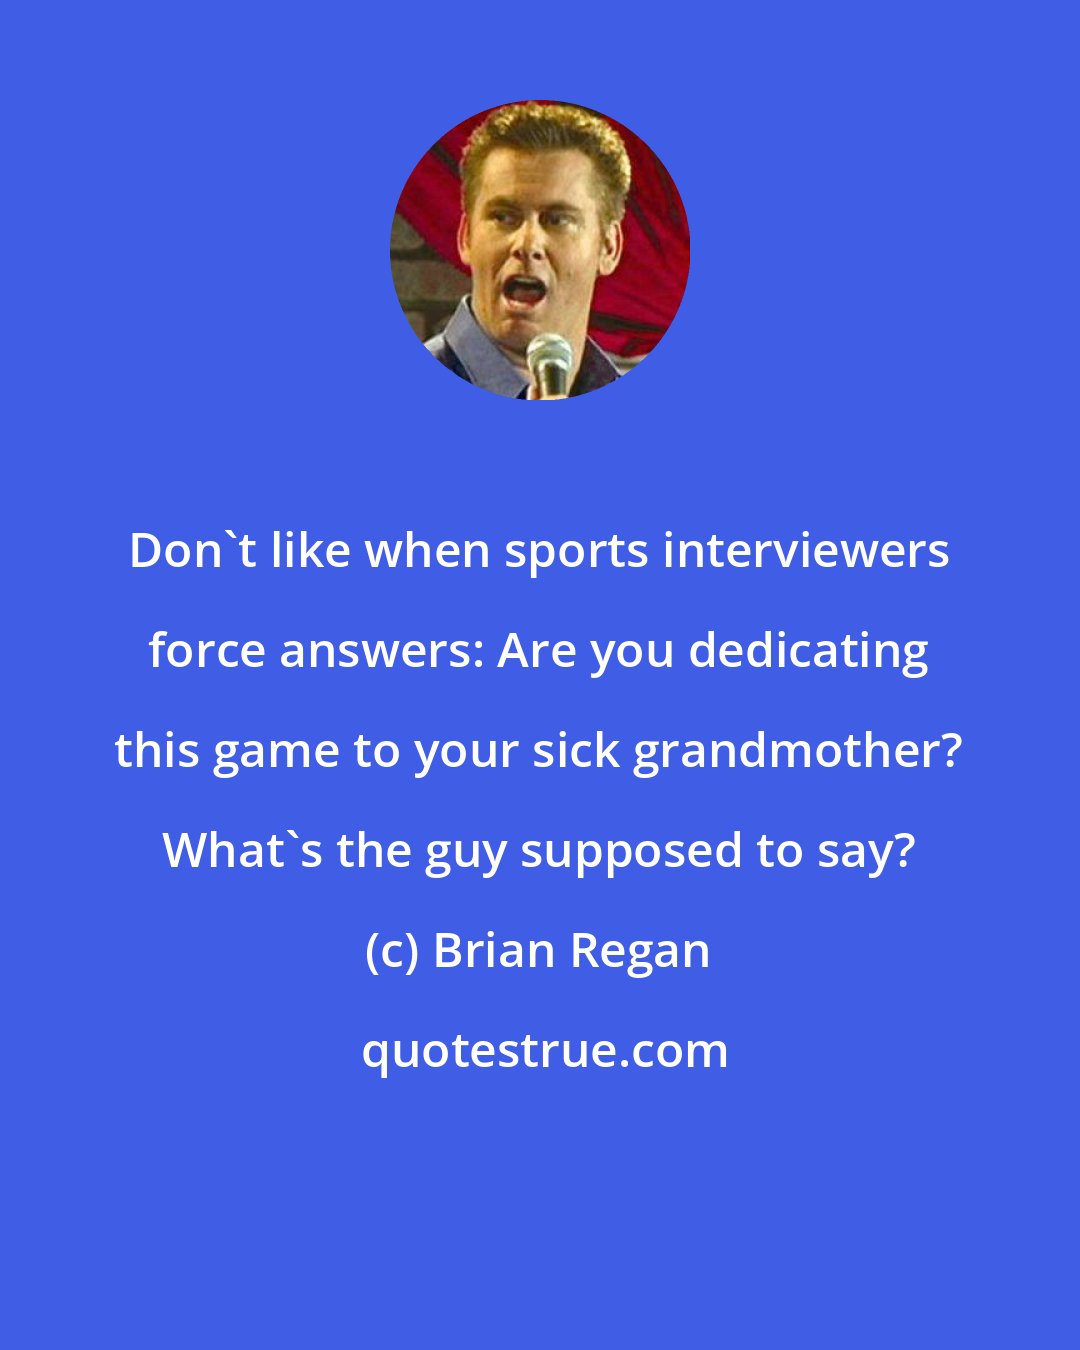 Brian Regan: Don't like when sports interviewers force answers: Are you dedicating this game to your sick grandmother? What's the guy supposed to say?